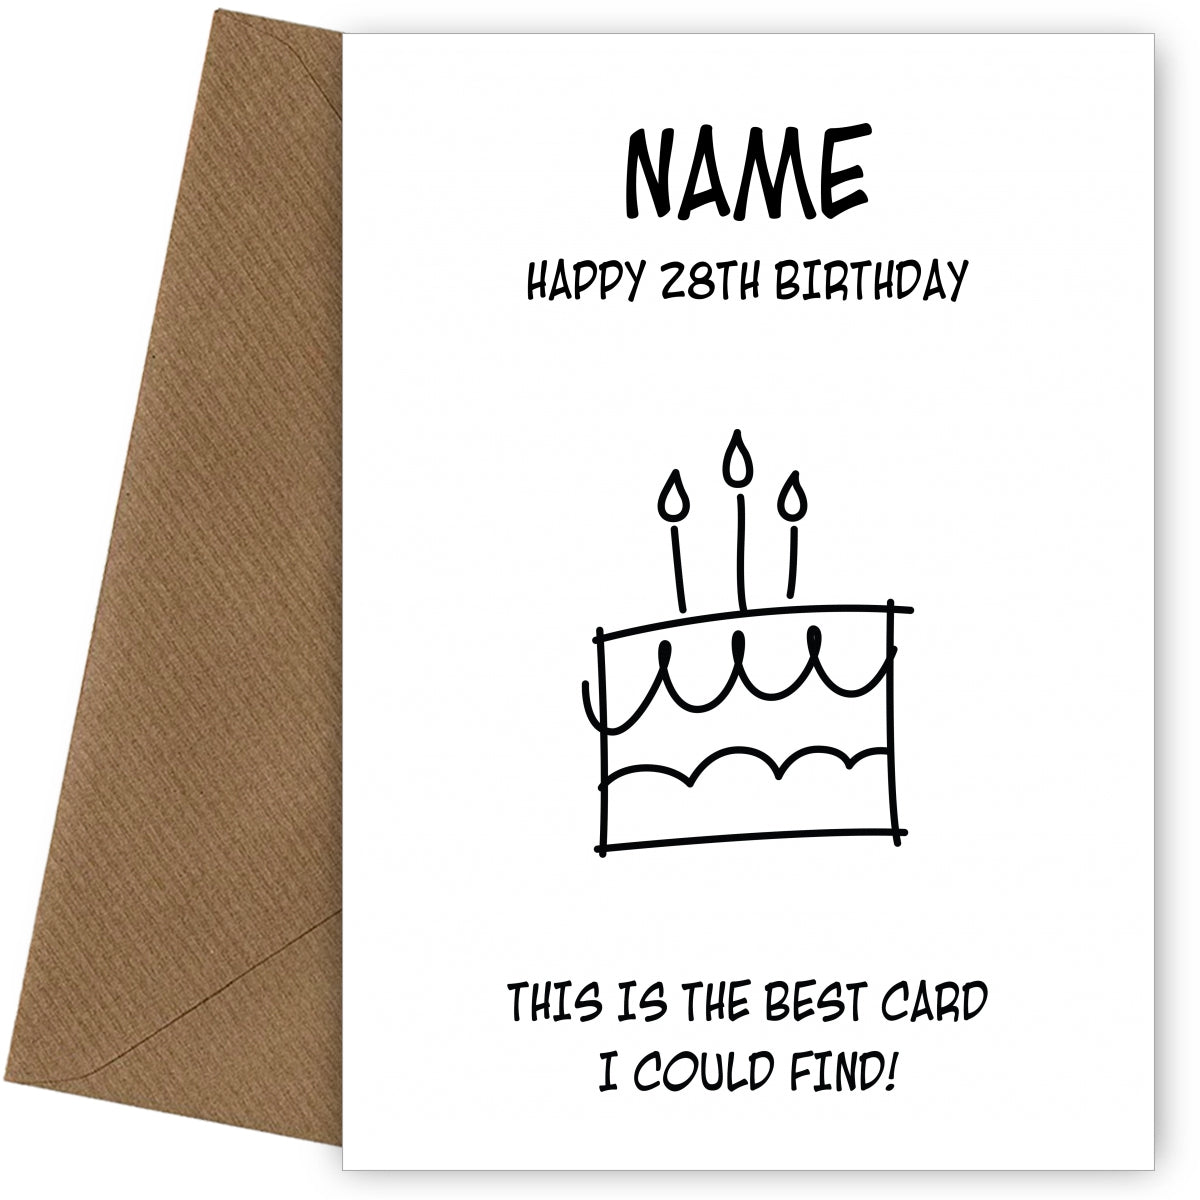 Happy 28th Birthday Card - Best Card I Could Find!